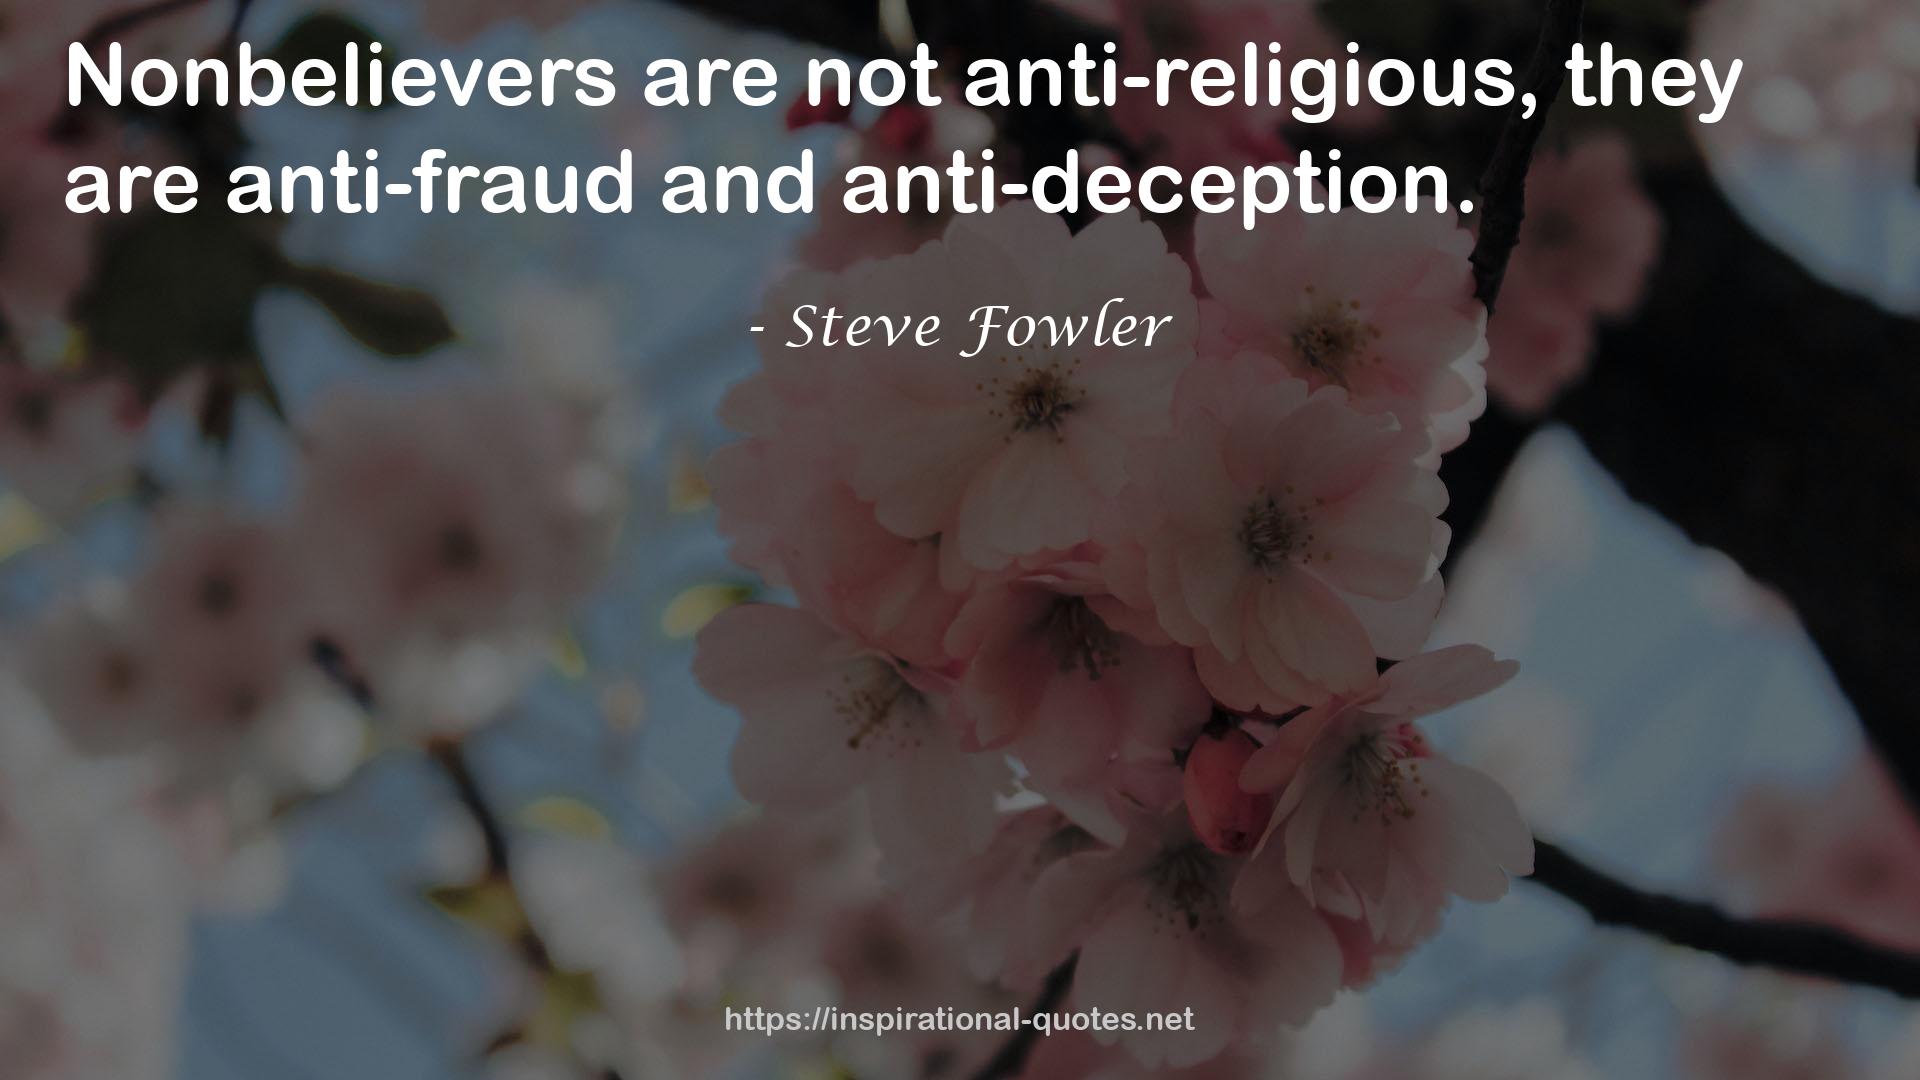 Steve Fowler QUOTES